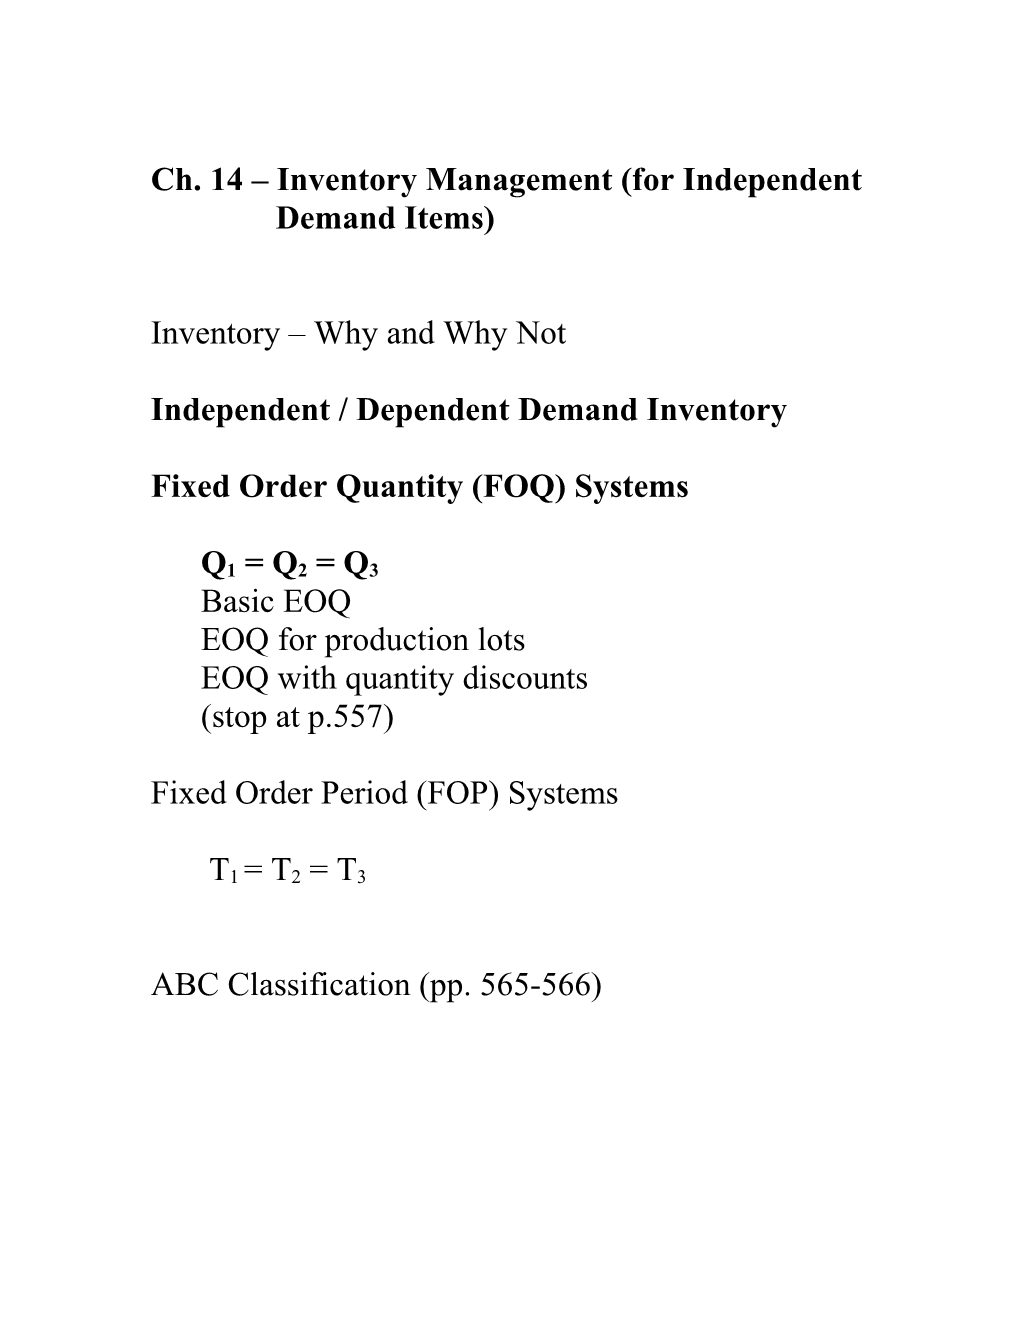 Ch. 14 Inventory Management (For Independent